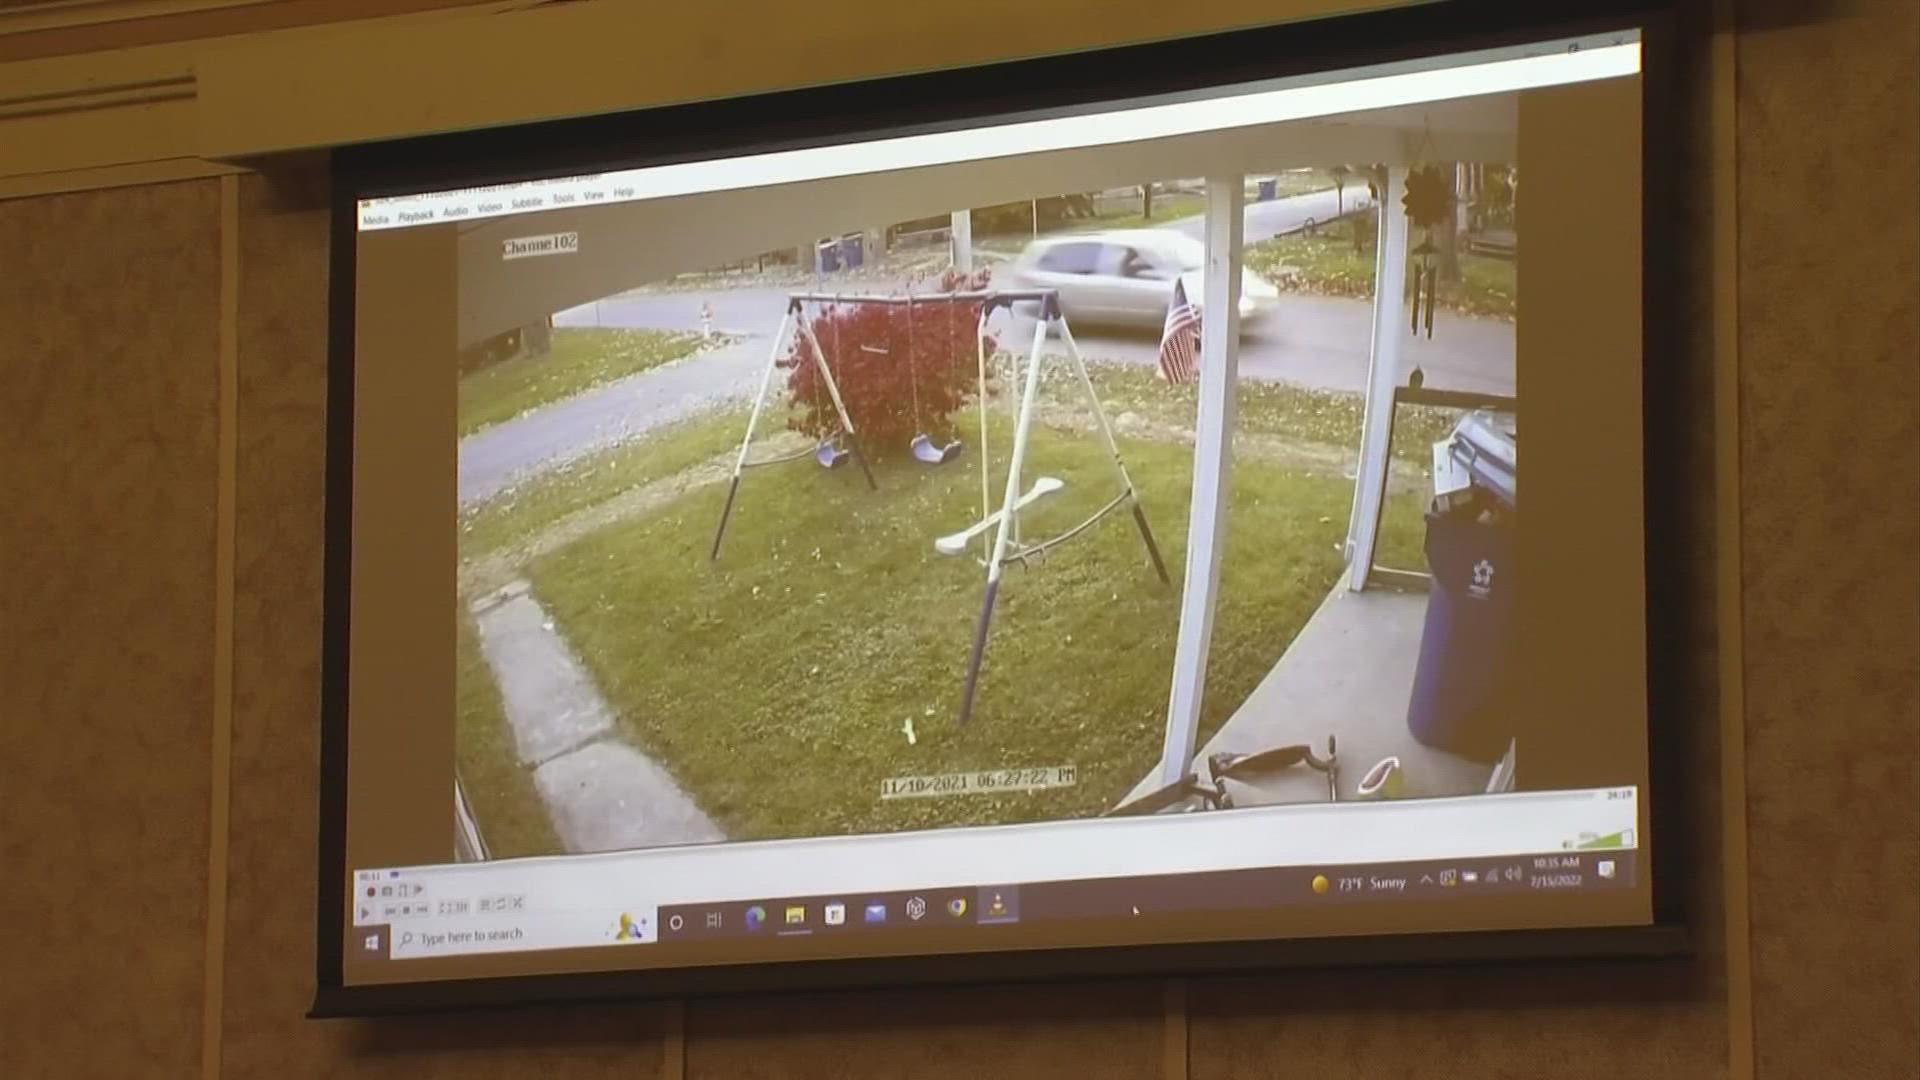 The video was captured by cameras on a home just up the street from where the little girl lived.